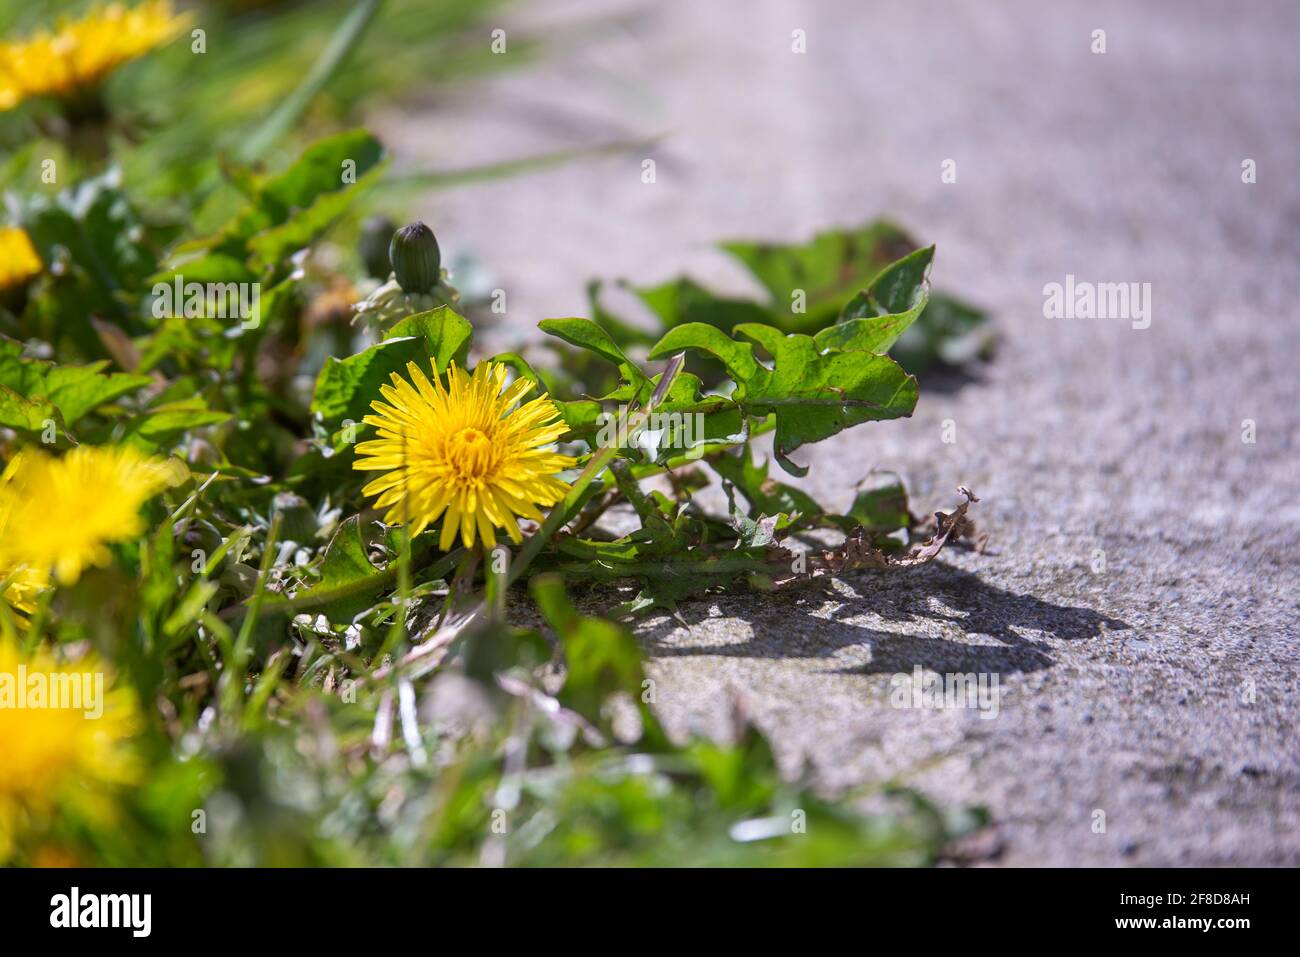 Dandelion weeds growing along a path Stock Photo